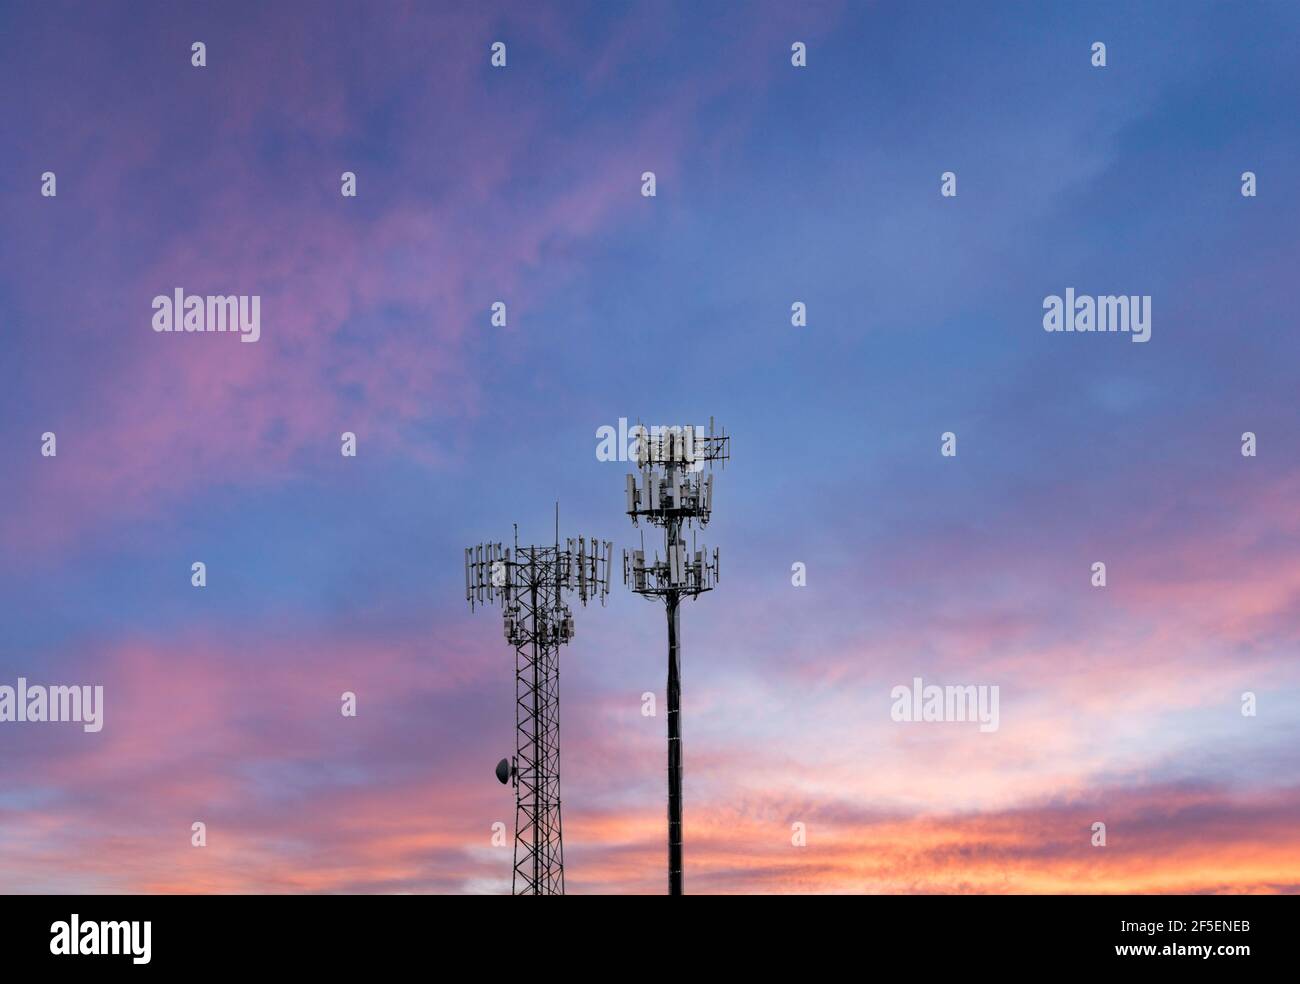 Two towers providing cellular broadband and data service to rural areas against the sunset. Illustrates digital divide. Stock Photo